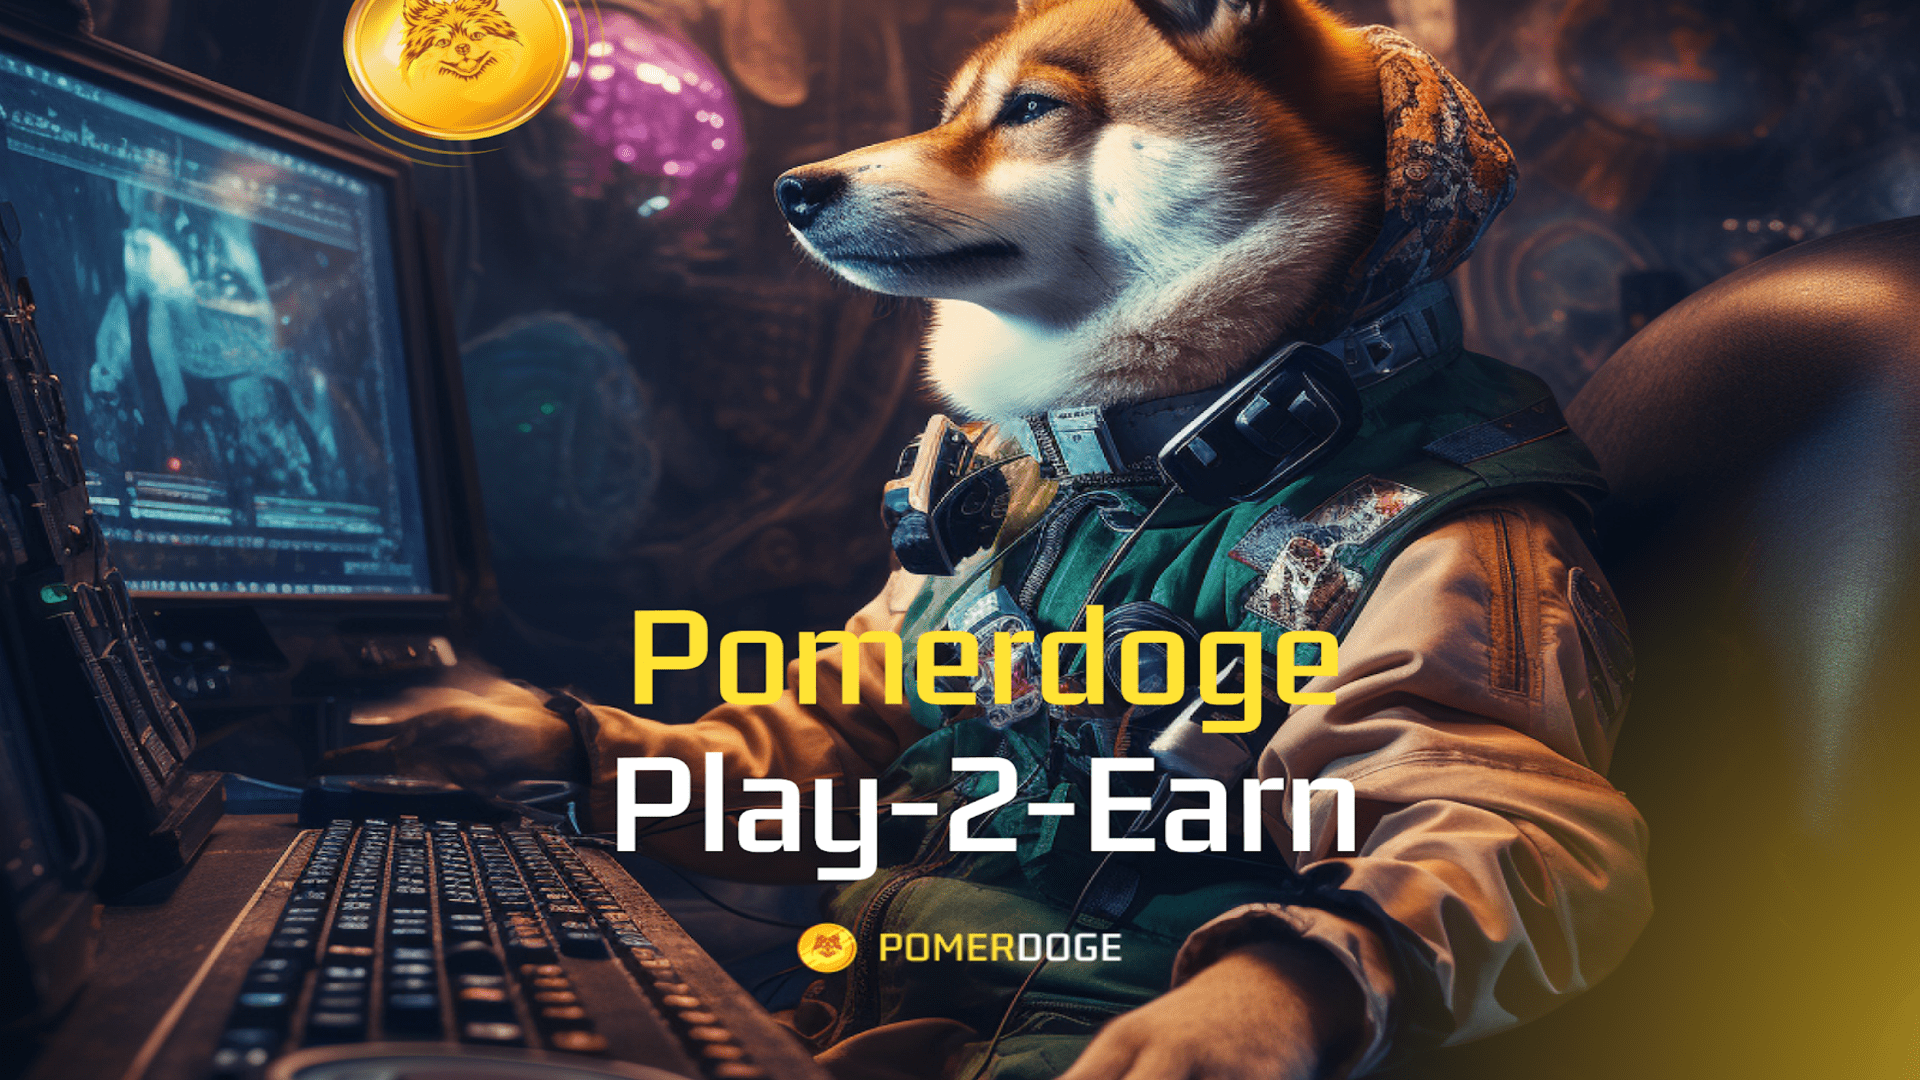 Loopring and Flare Fall While New Meme Coin Pomerdoge Gets Off To A Flying Start